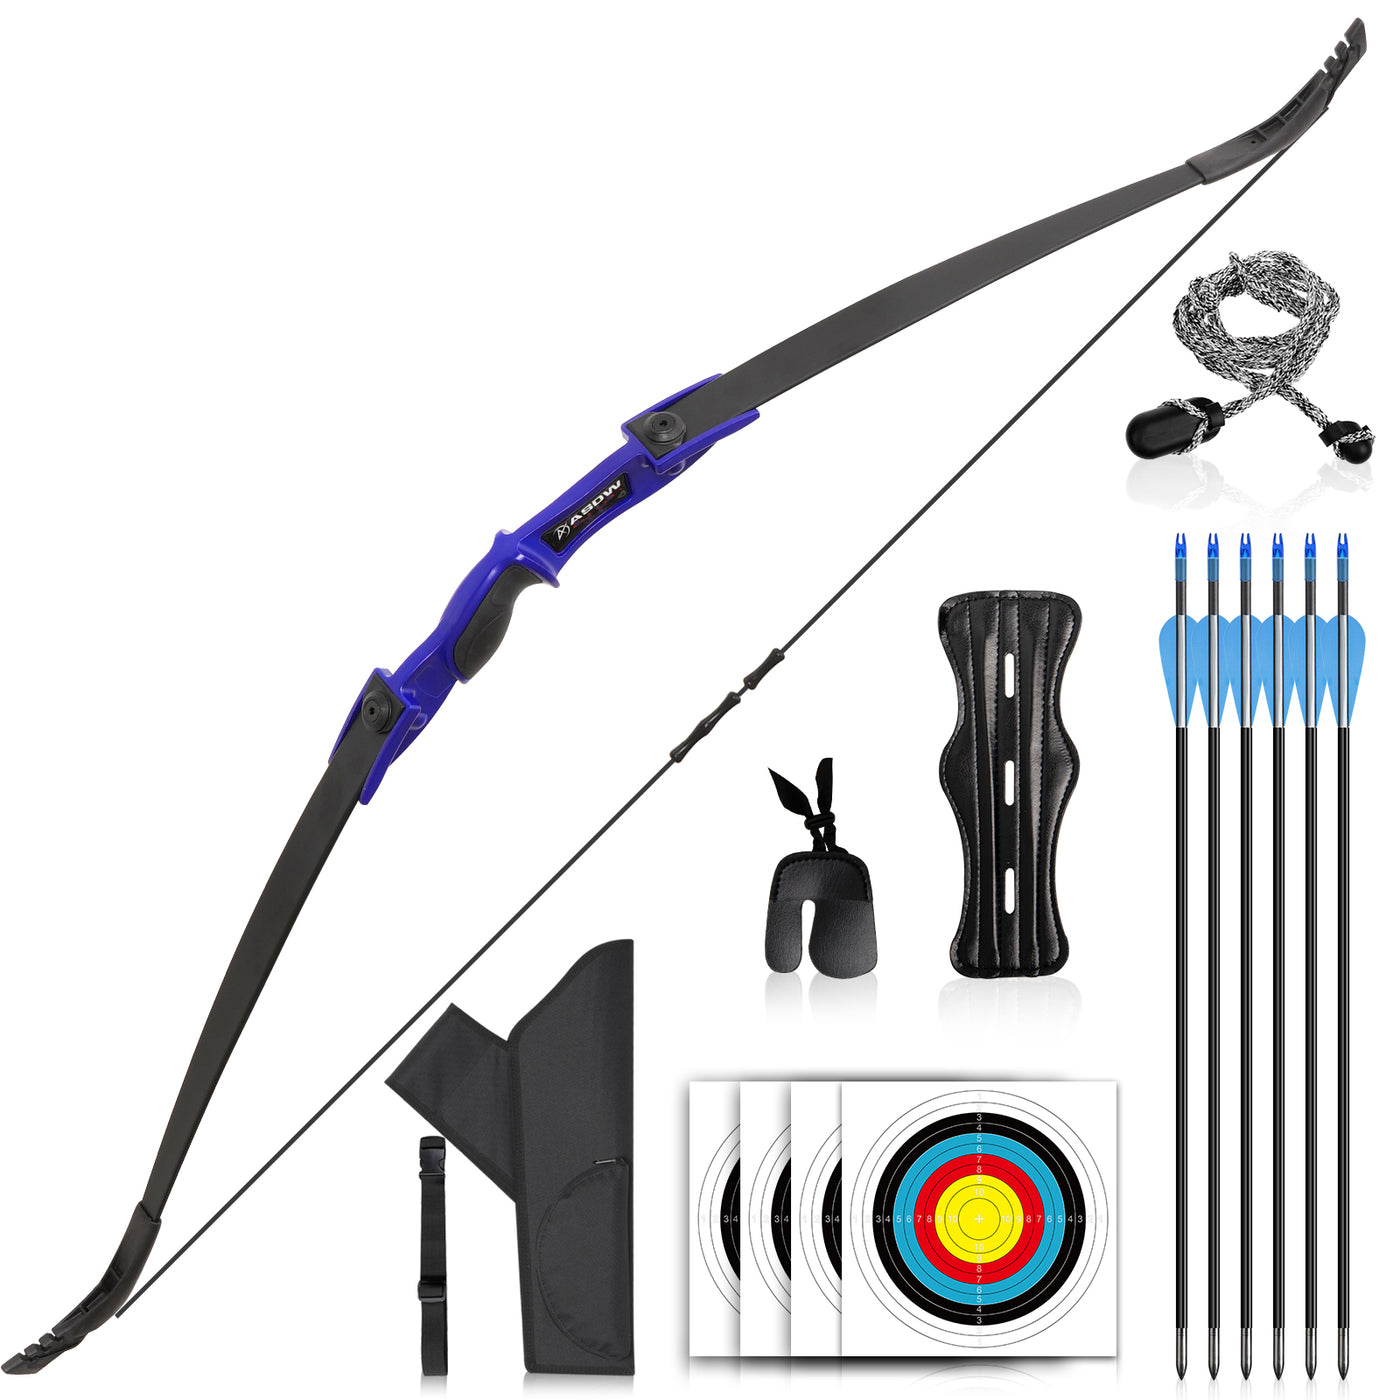 F117 54" Black Youth Bow Set Takedown Bow Beginner Bow&Arrow 25-35 Lbs, For 12+